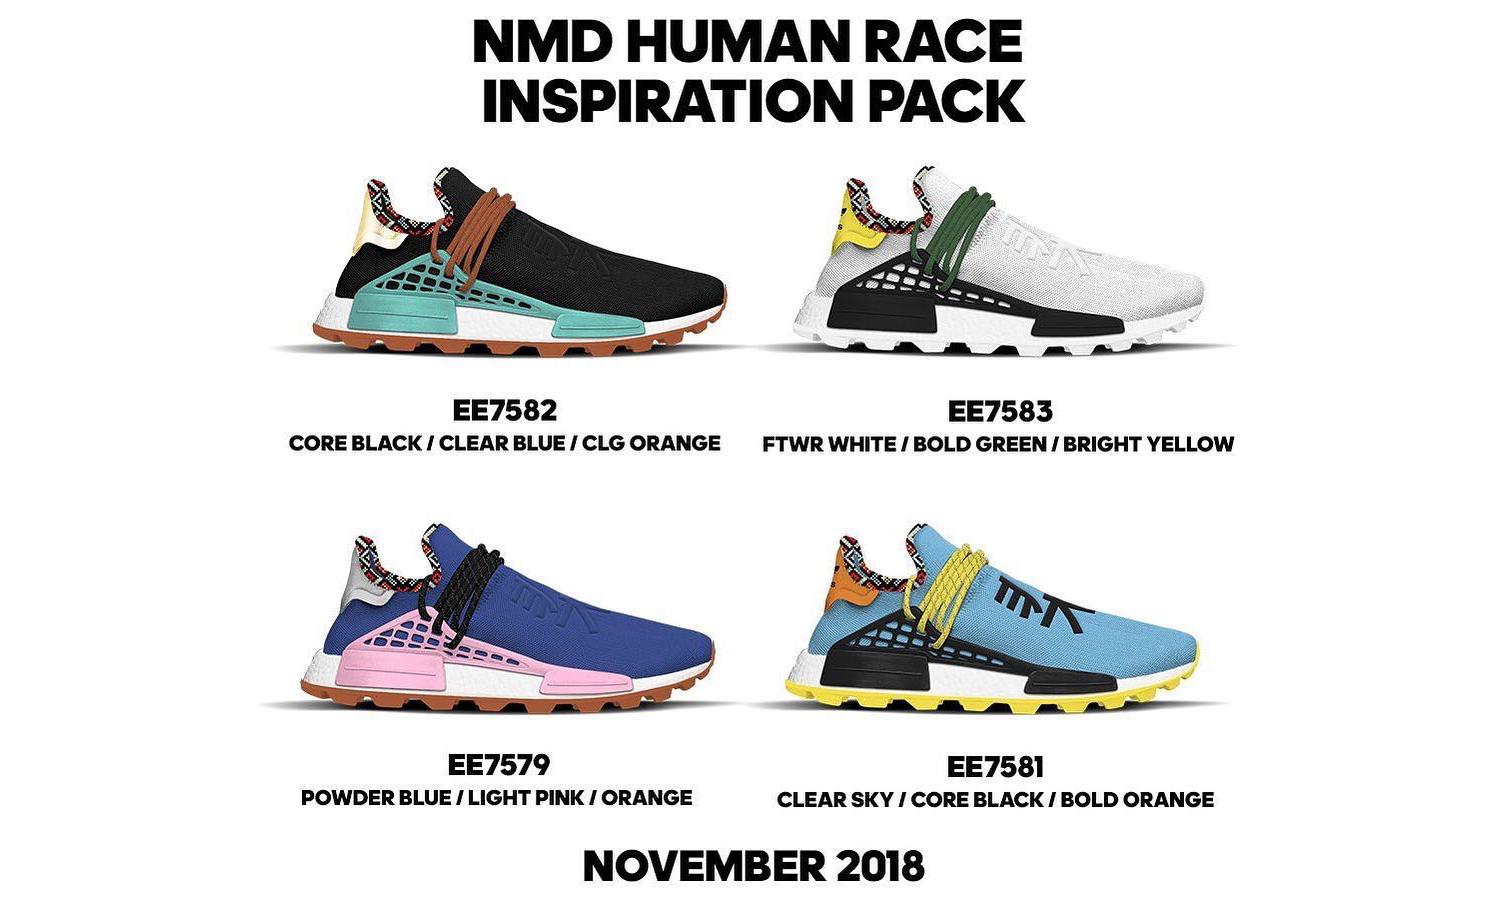 pharrell williams inspiration pack meaning